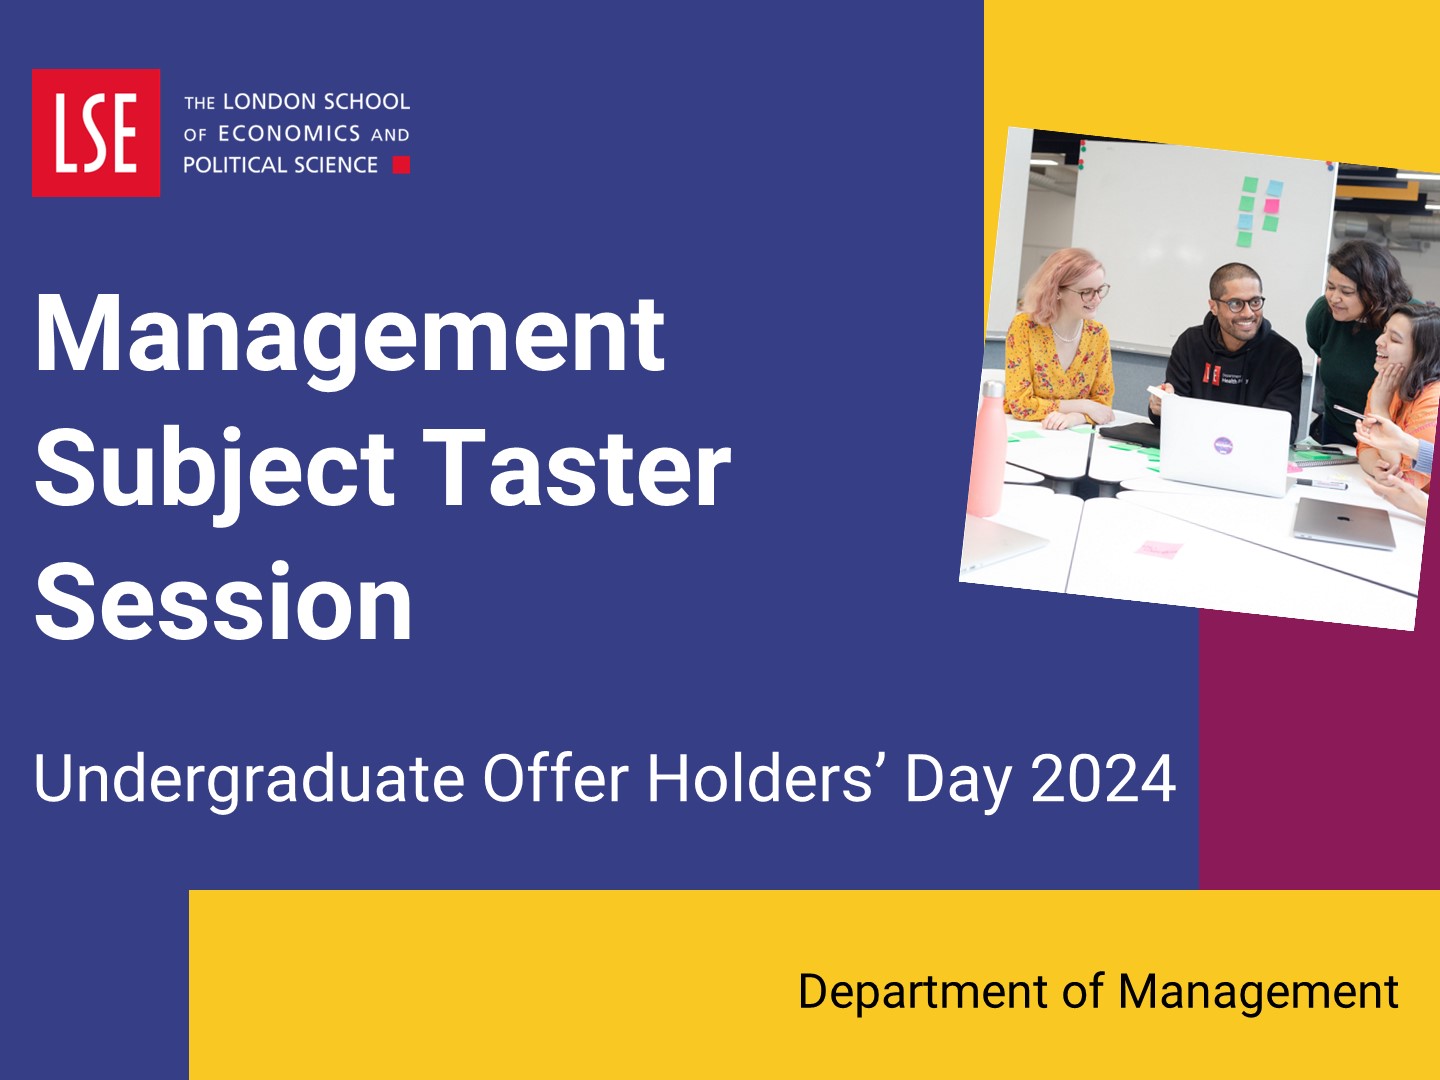 Watch the management subject taster session